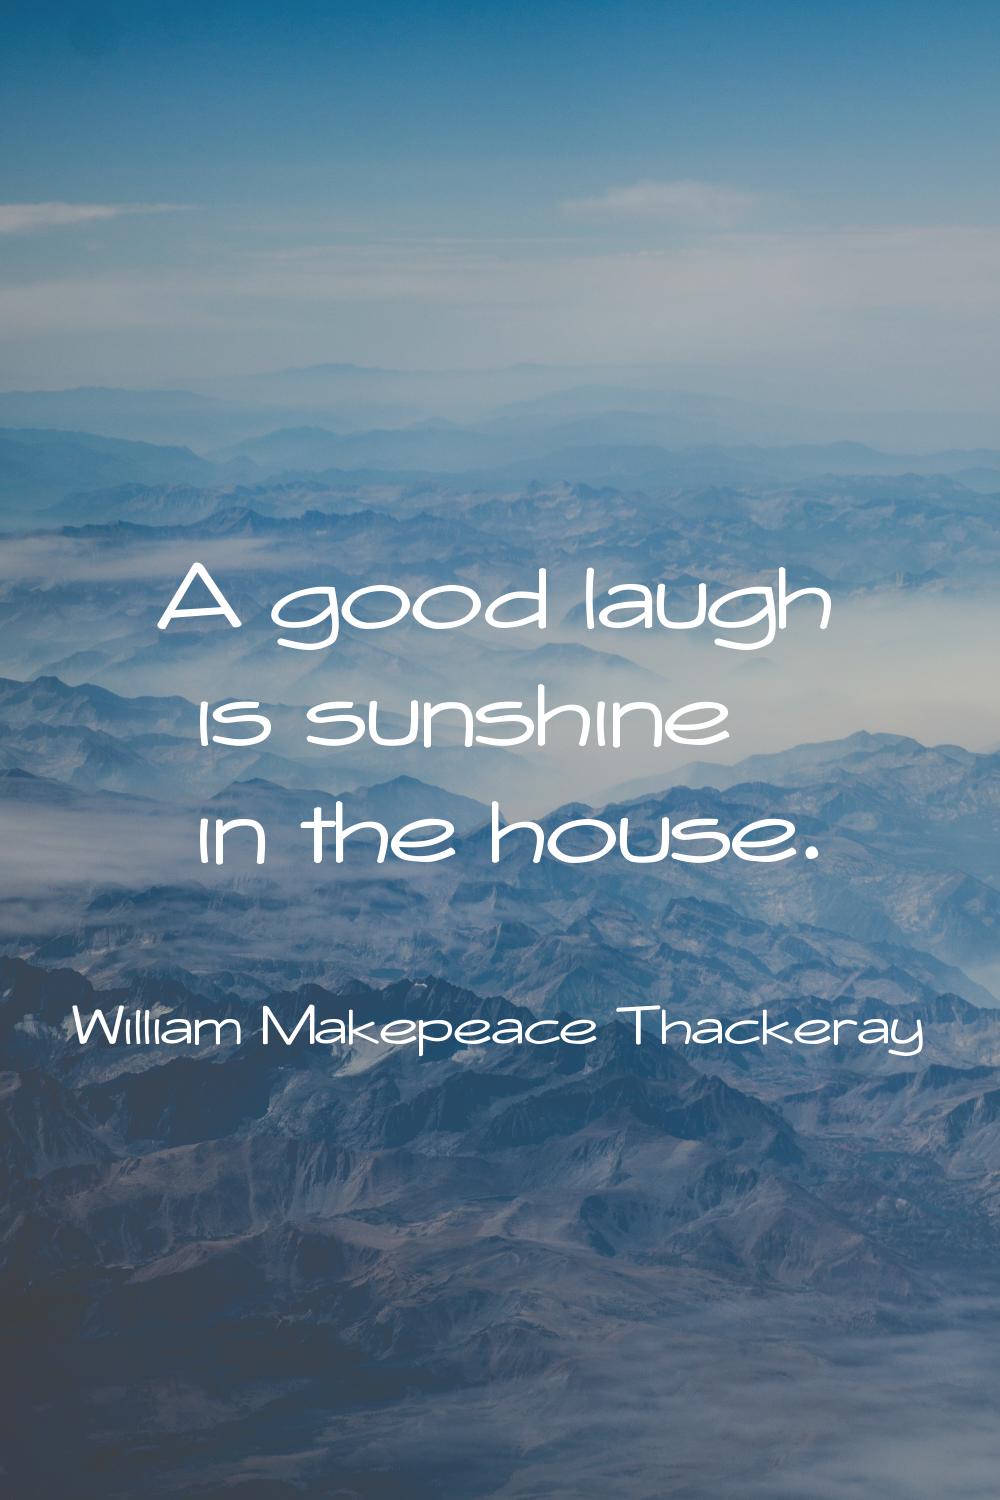 A good laugh is sunshine in the house.